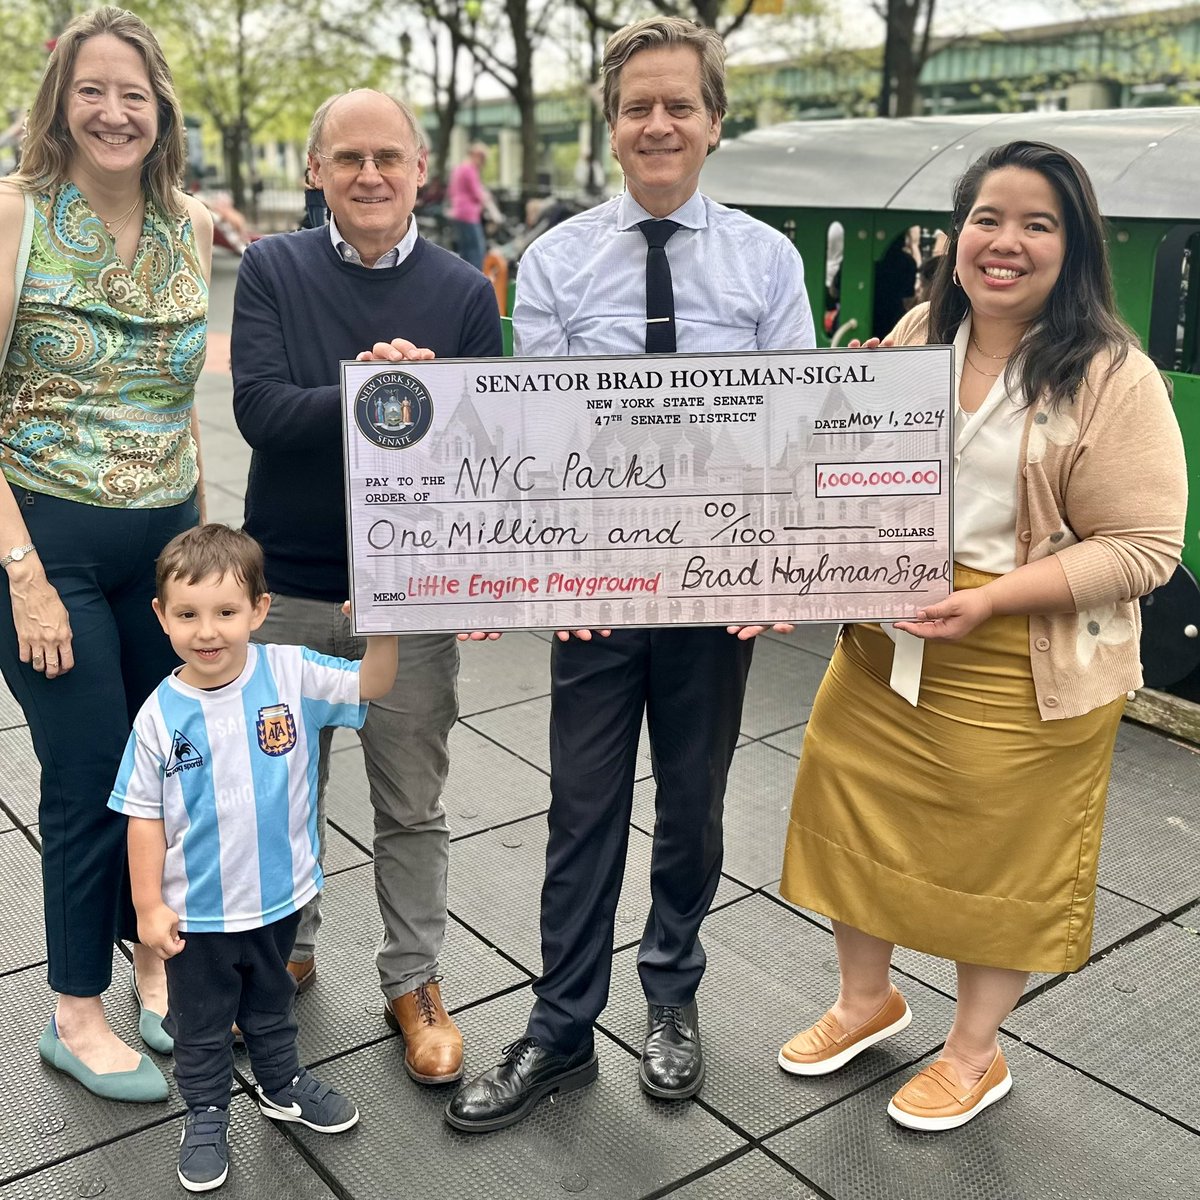 Recently, I presented a $1 million state grant to the beloved Little Engine Playground, which has delighted train-obsessed tykes on the Upper West Side for decades, and will make the park more accessible and safer for children for years to come.